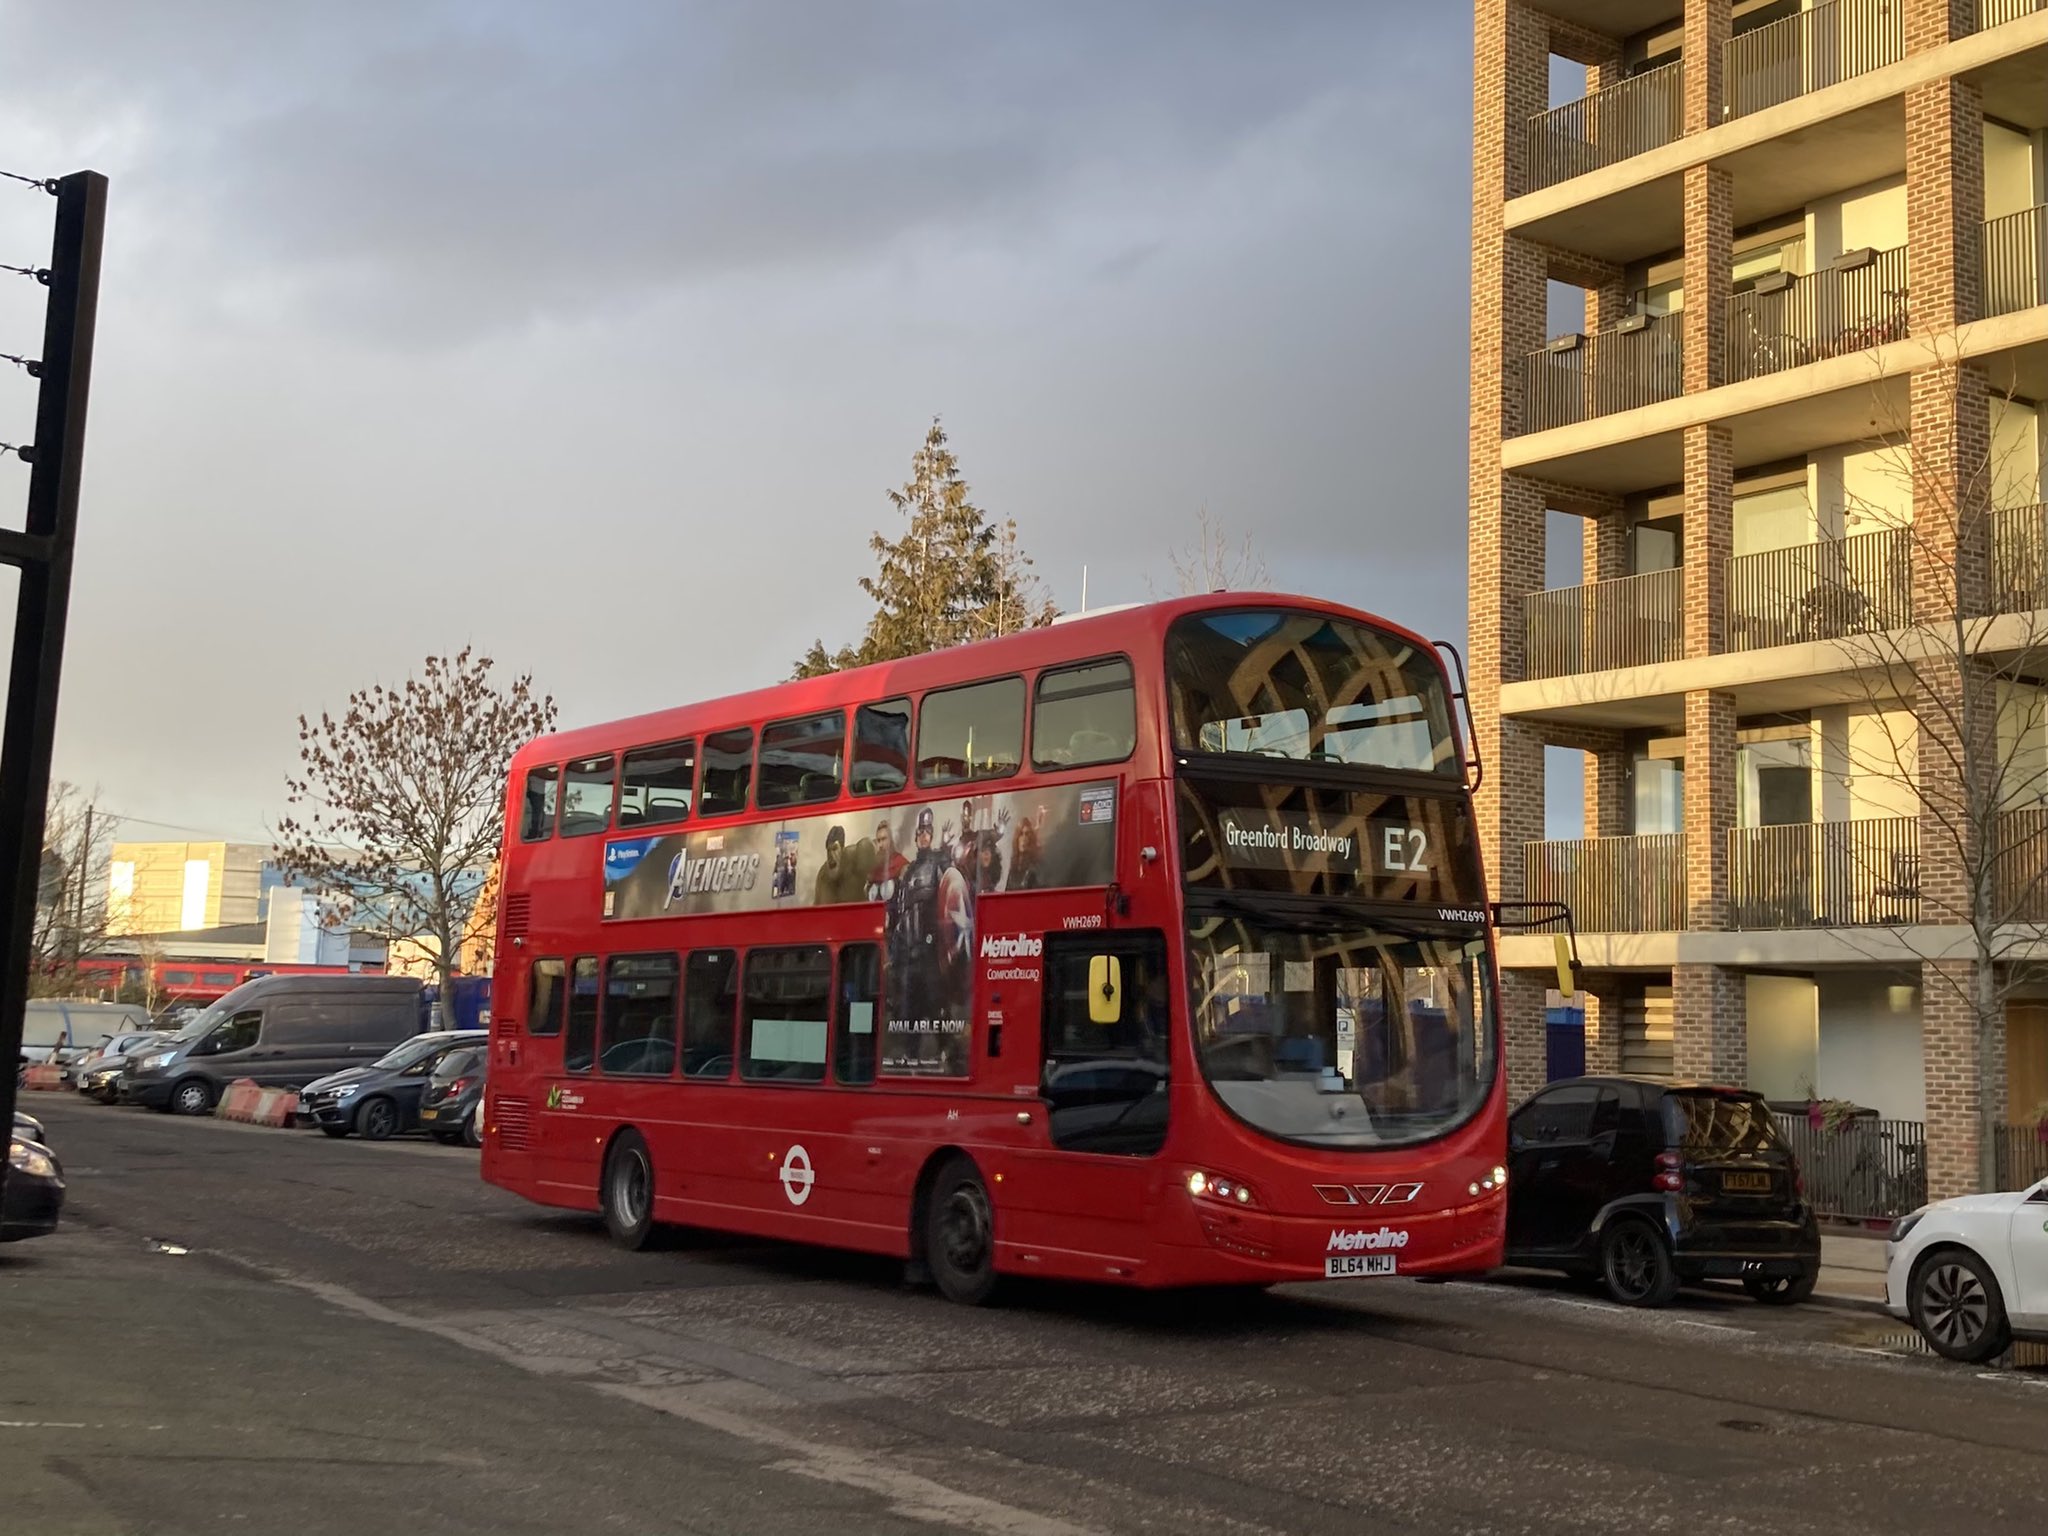 London Bus Photo - #FriendlyFriday VWH2699 (BL64MHJ) and VWH2706 (BF15KFU) are seen working Route E2 back on the 22nd of January, with this day being both buses first appearance